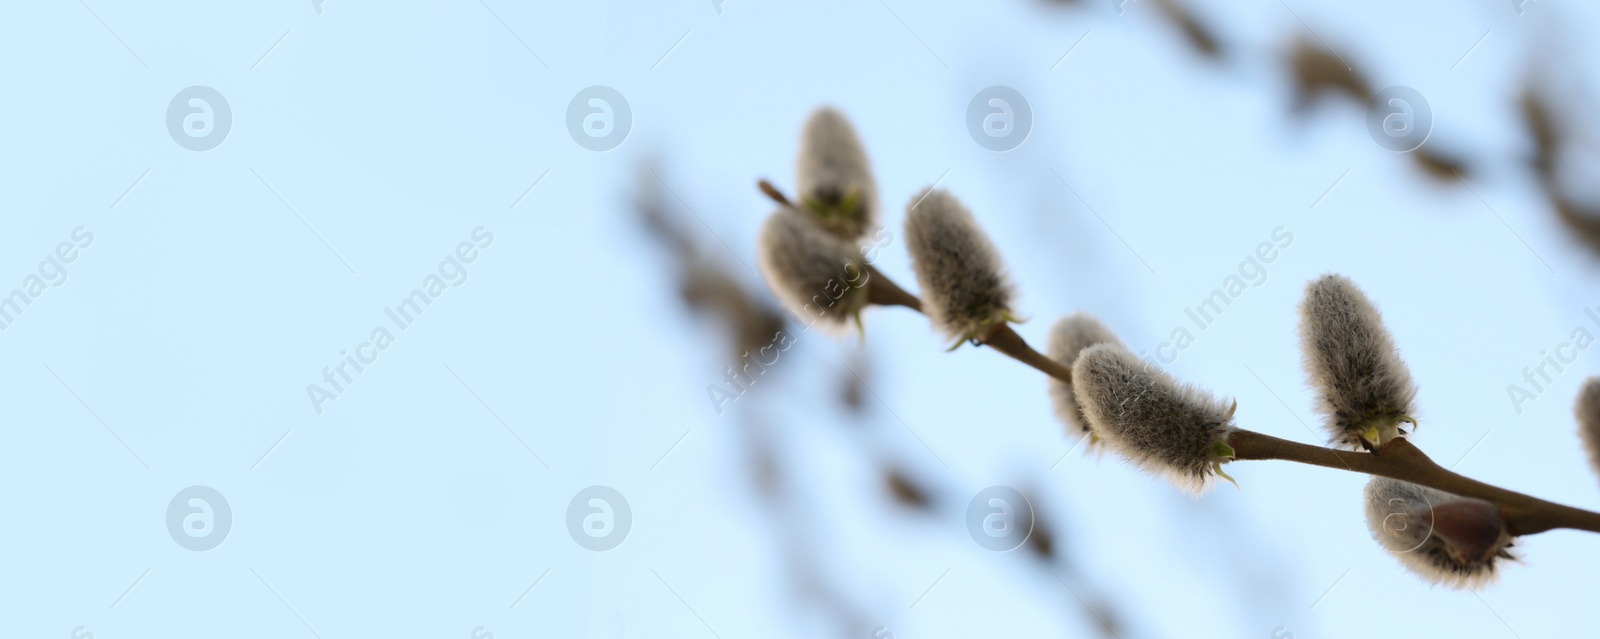 Image of Beautiful pussy willow branch against blue sky, closeup view with space for text. Banner design